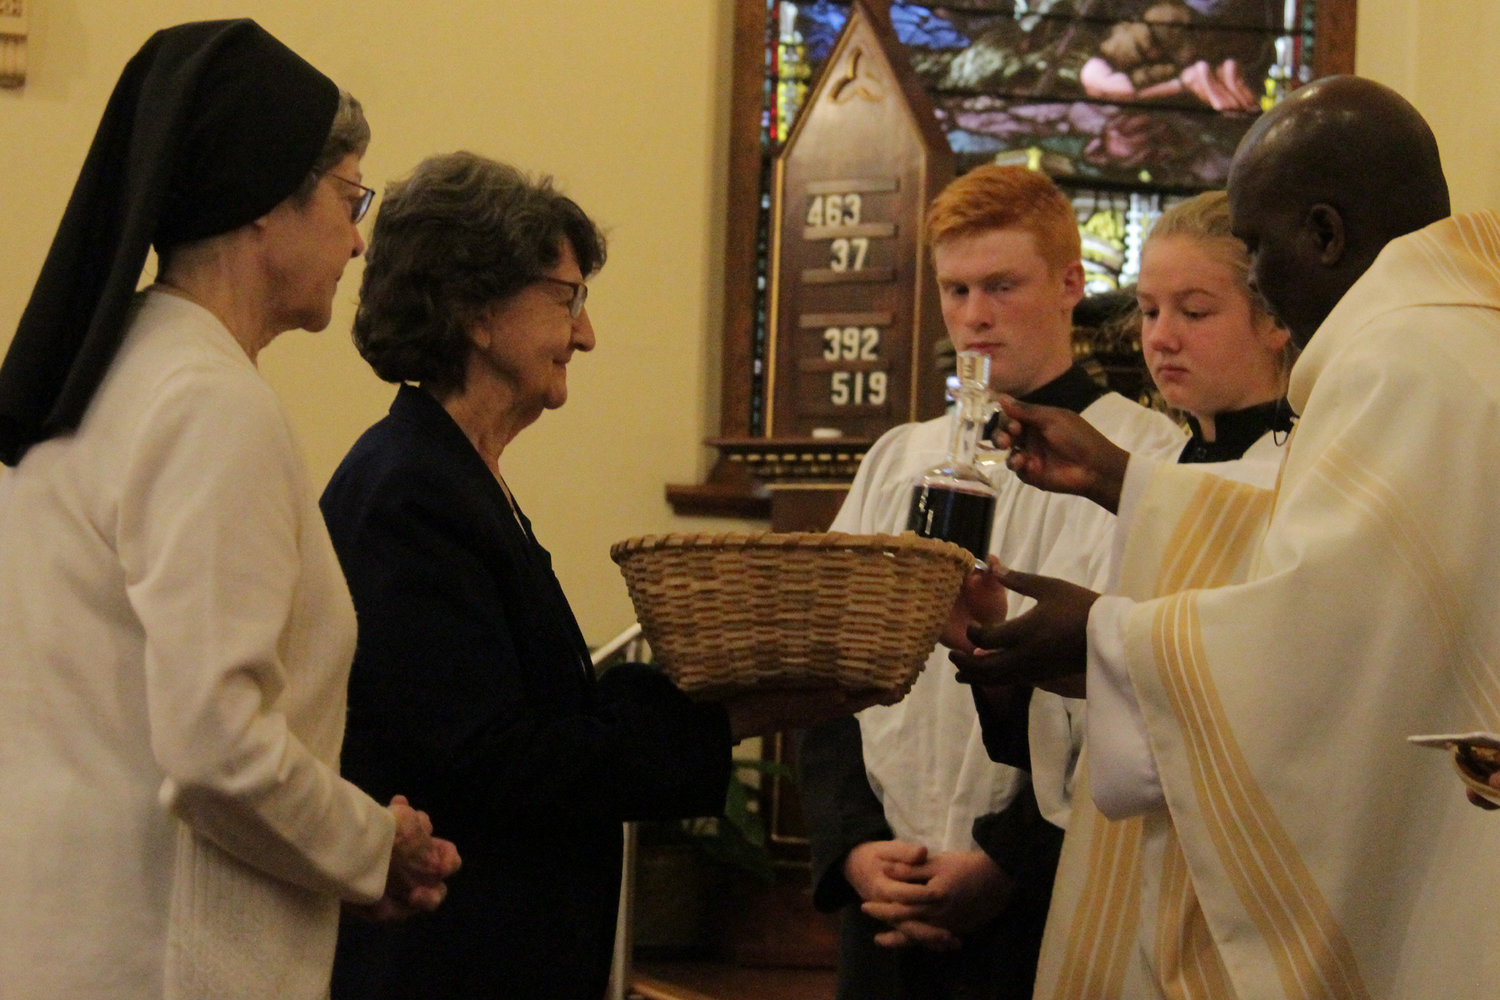 Sister Kathleen Donovan of the School Sisters of Notre Dame, a former principal of St. Thomas the Apostle School, and Sister Rosemary Boessen of the Sisters of Mercy, a St. Thomas native, present the gifts of bread and wine to Father Leonard Mukiibi, administrator of St. Thomas the Apostle parish, during a Mass for the parish’s 150th anniversary.